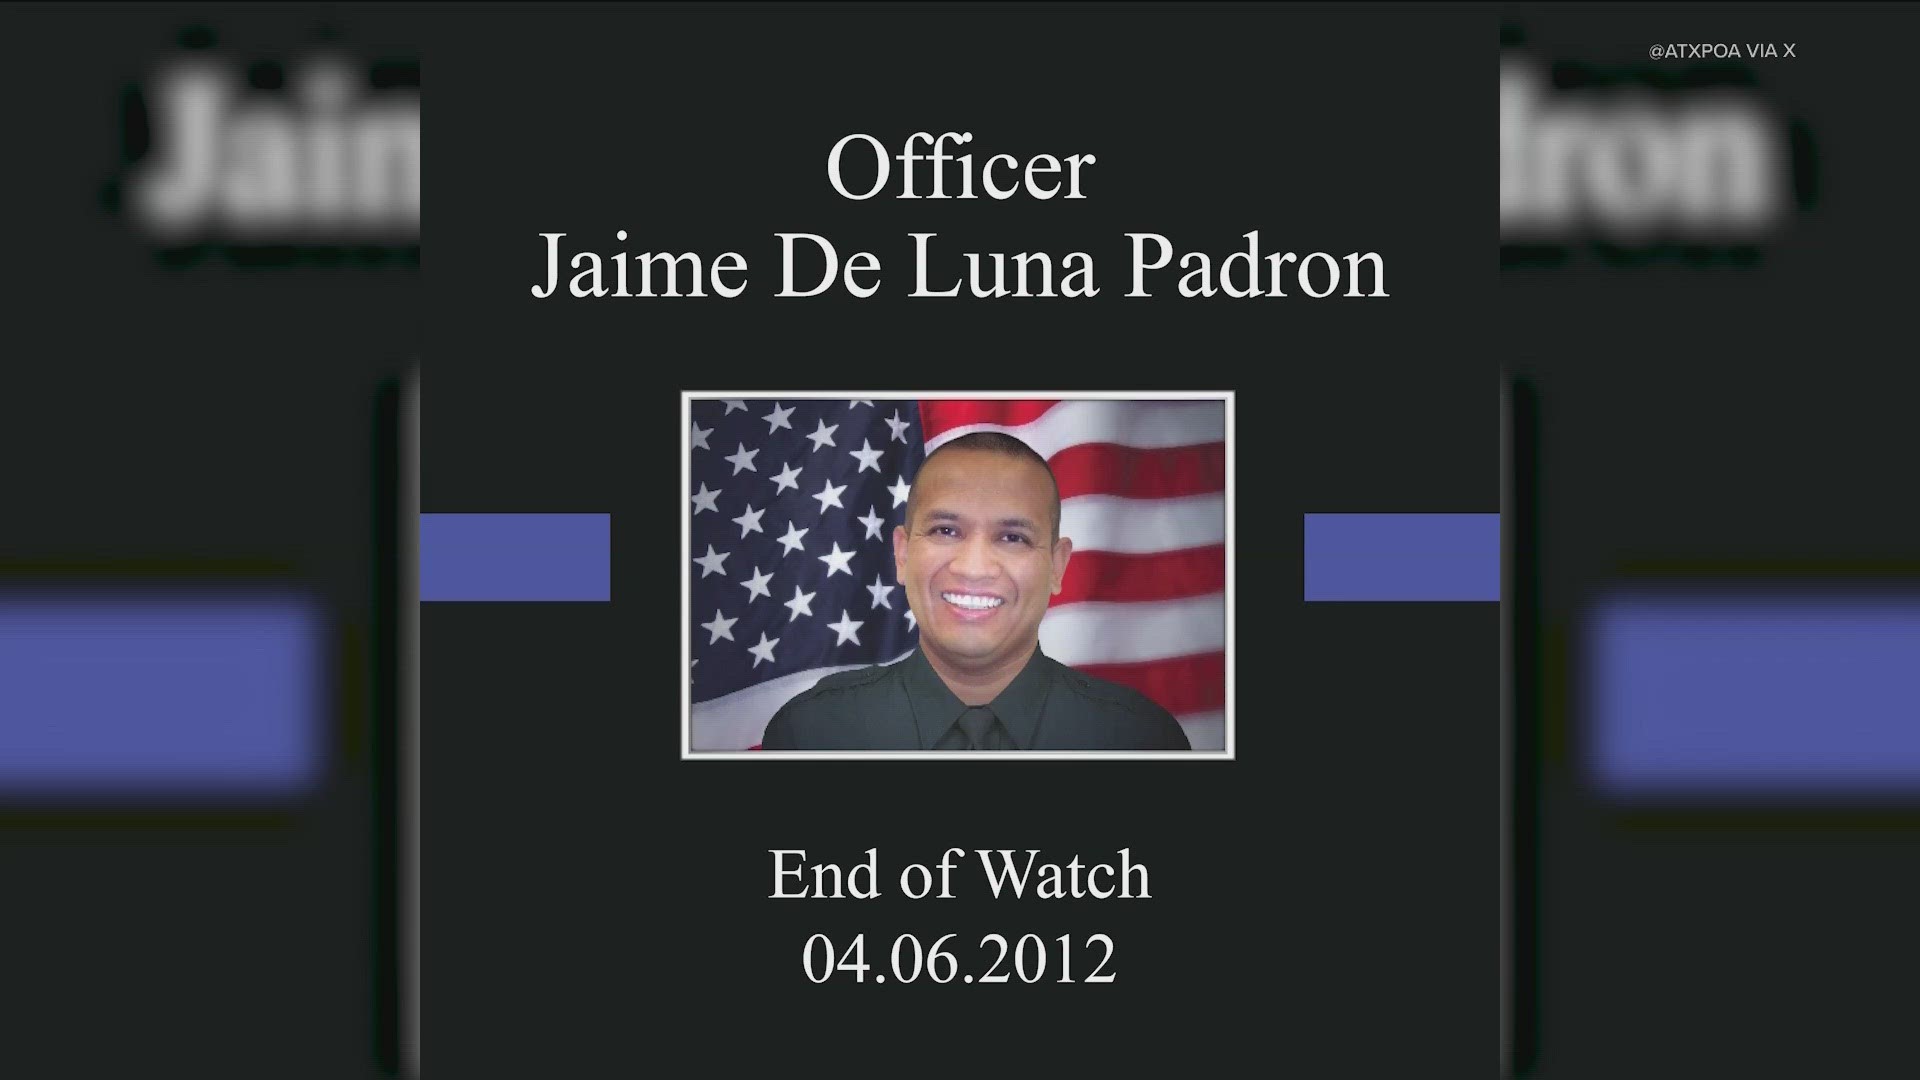 April 6 marks the 12-year anniversary of APD senior officer Jaime Padron's death in the line of duty.